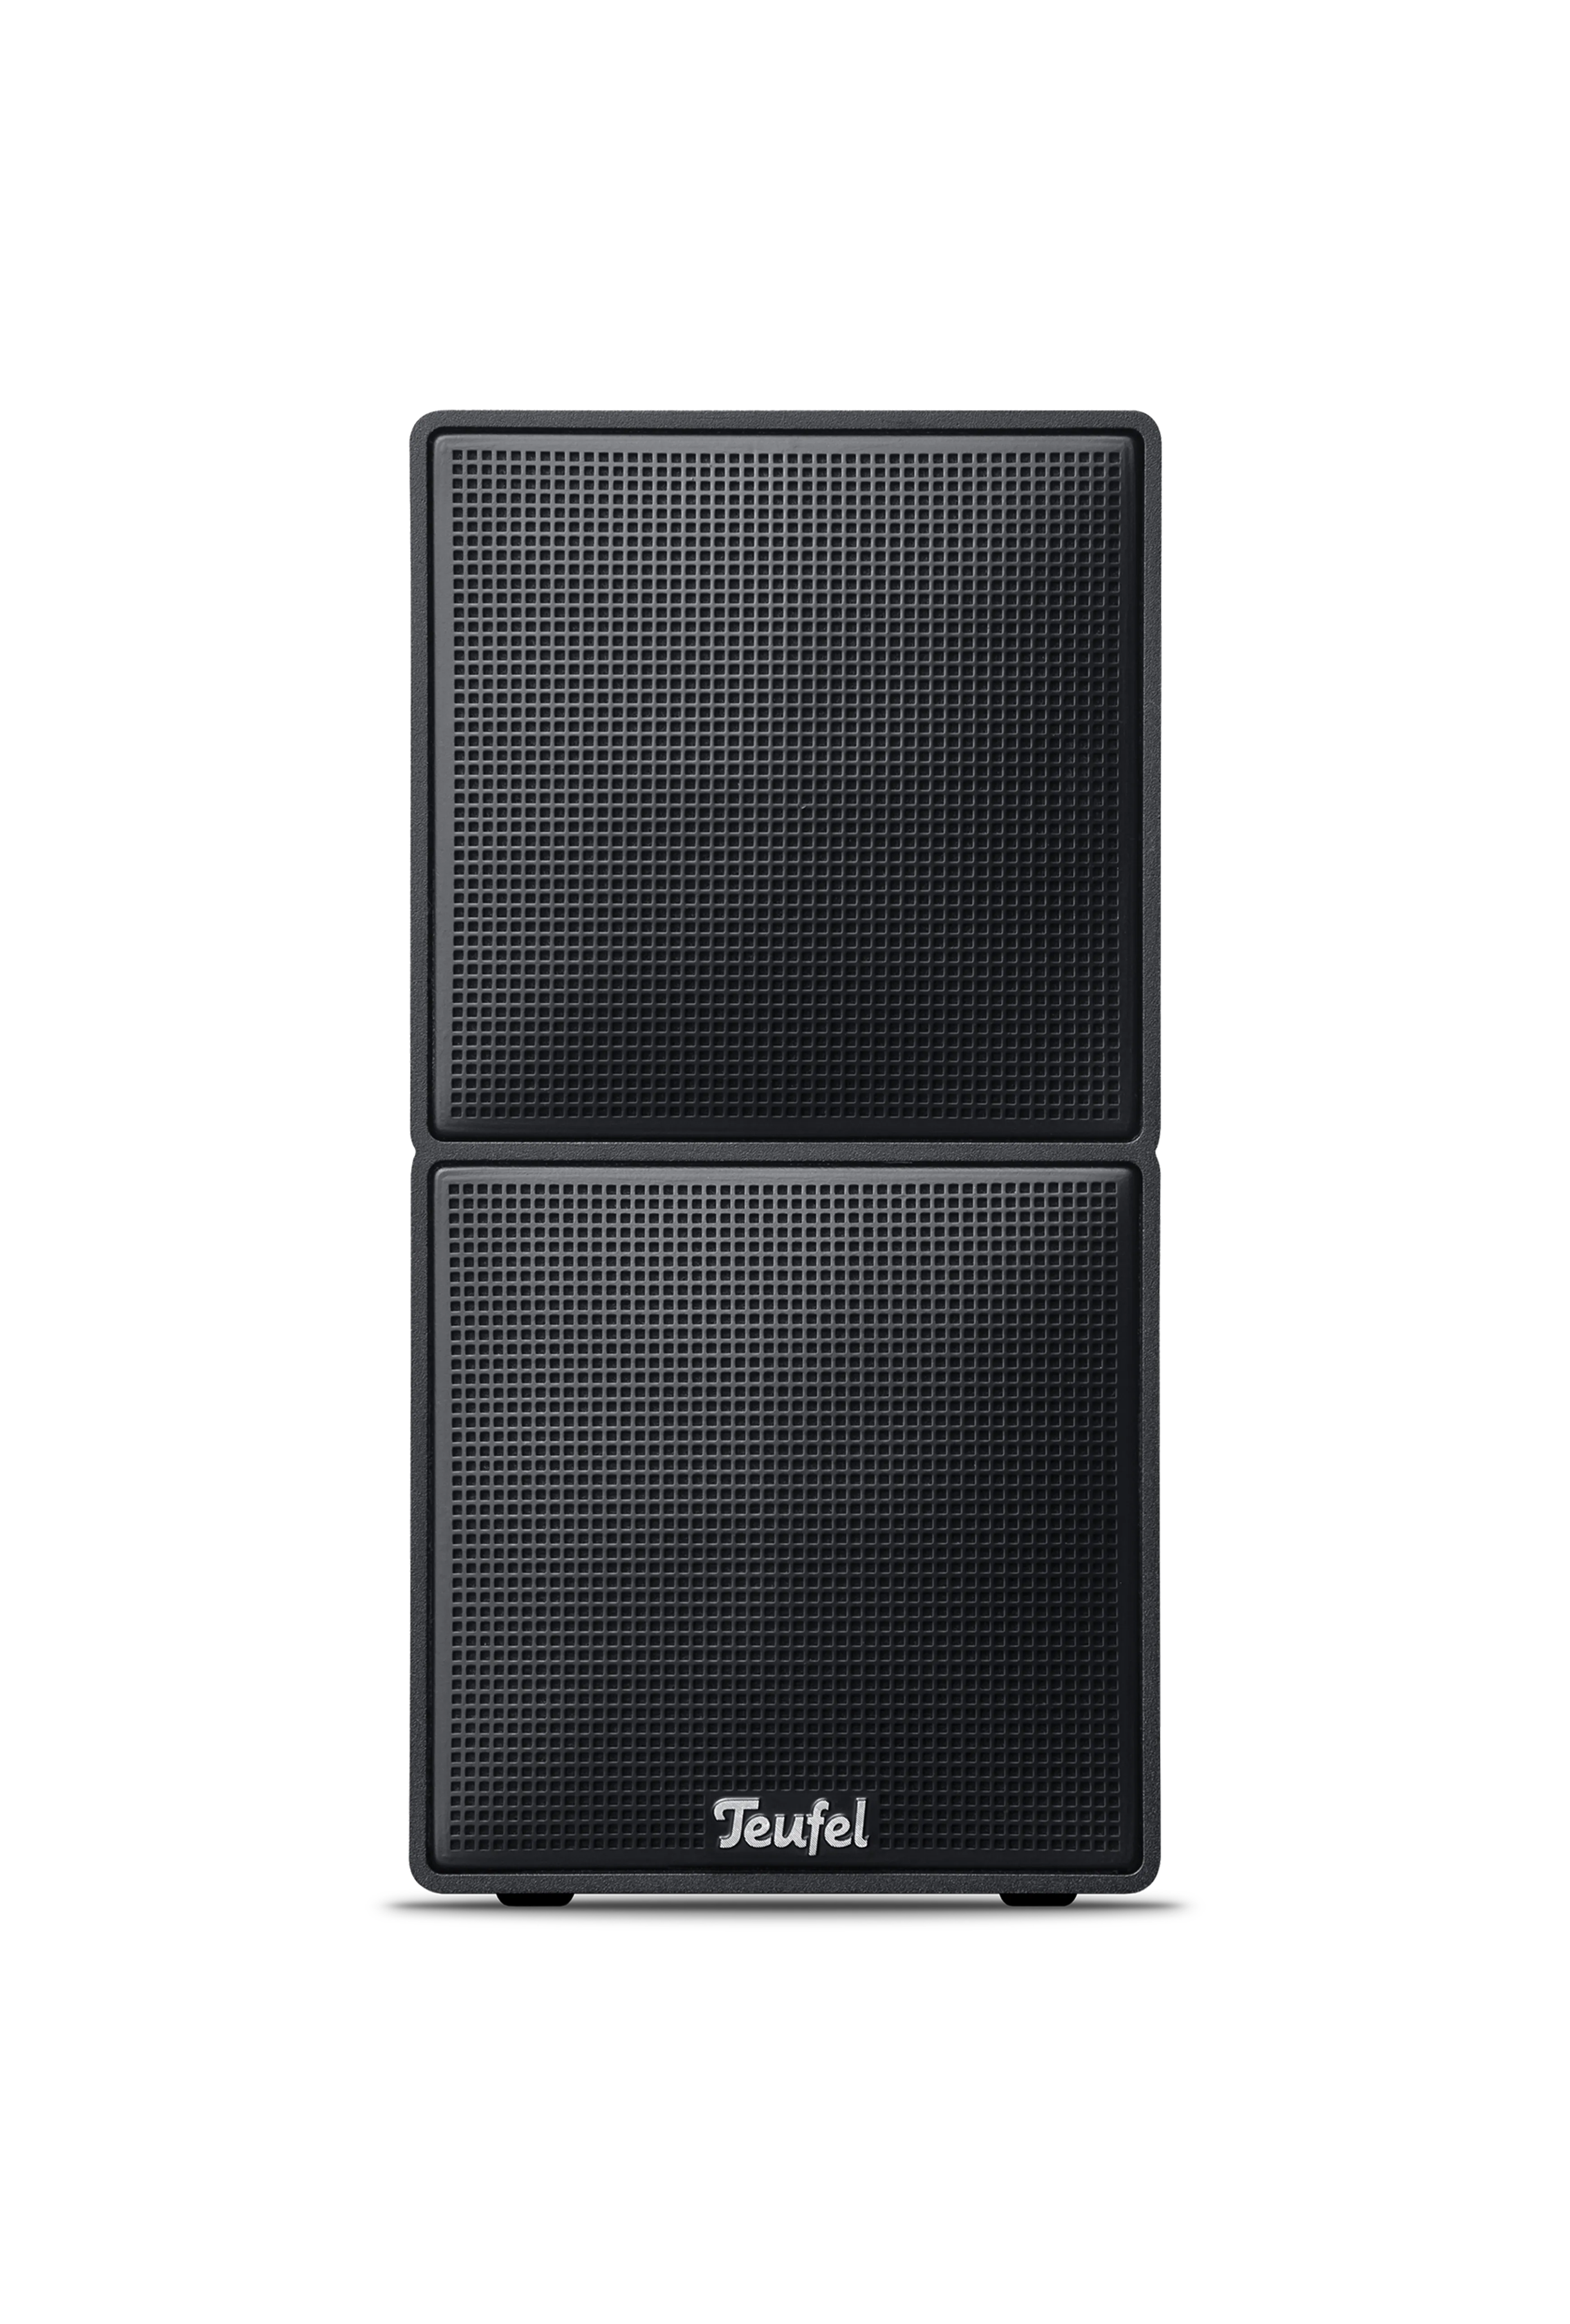 A frontal view of a black Teufel speaker